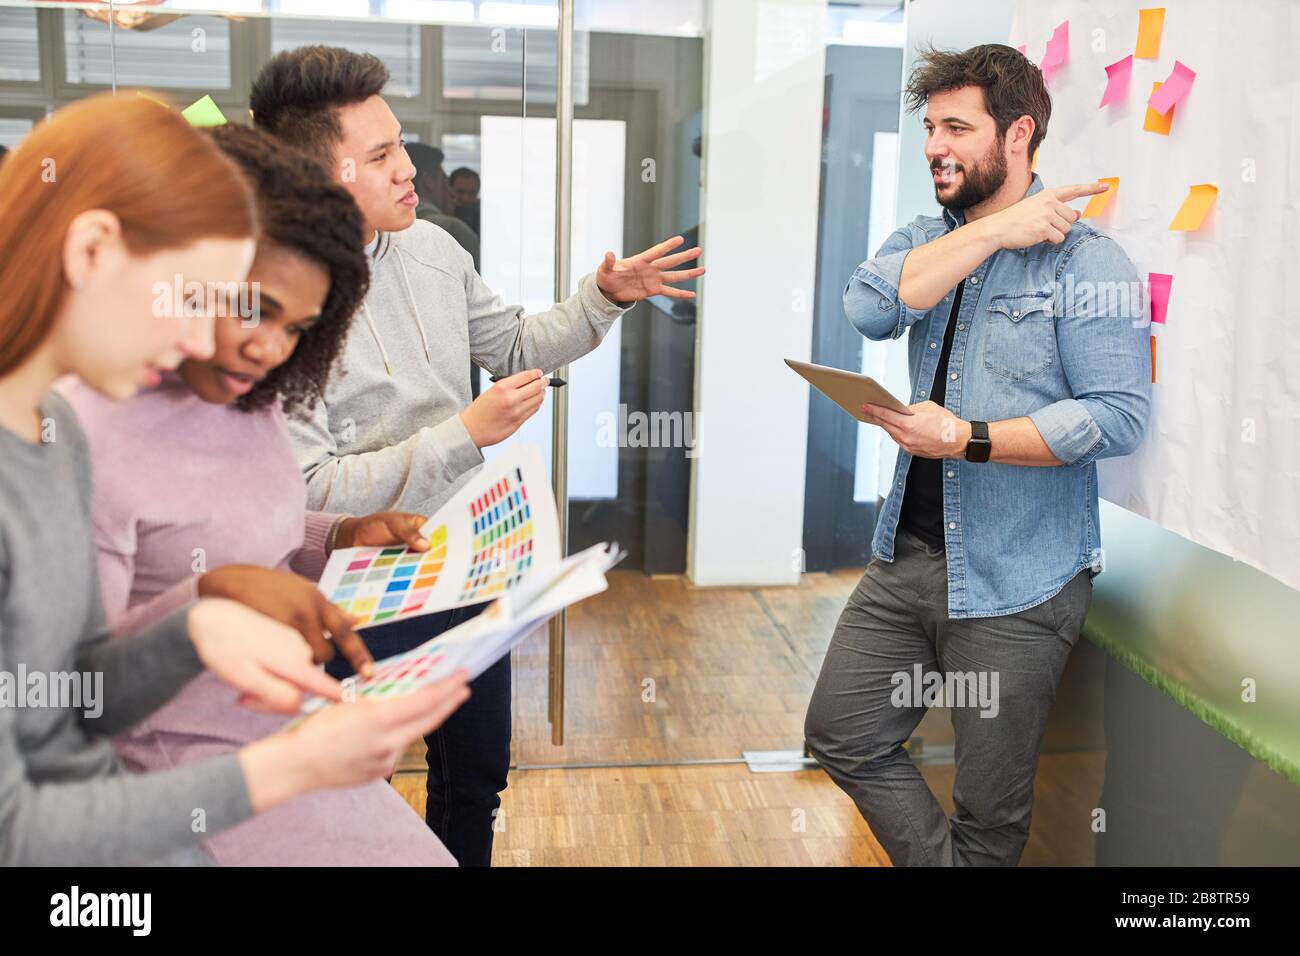 Graphic designers and web developers discuss a design project during brainstorming Stock Photo